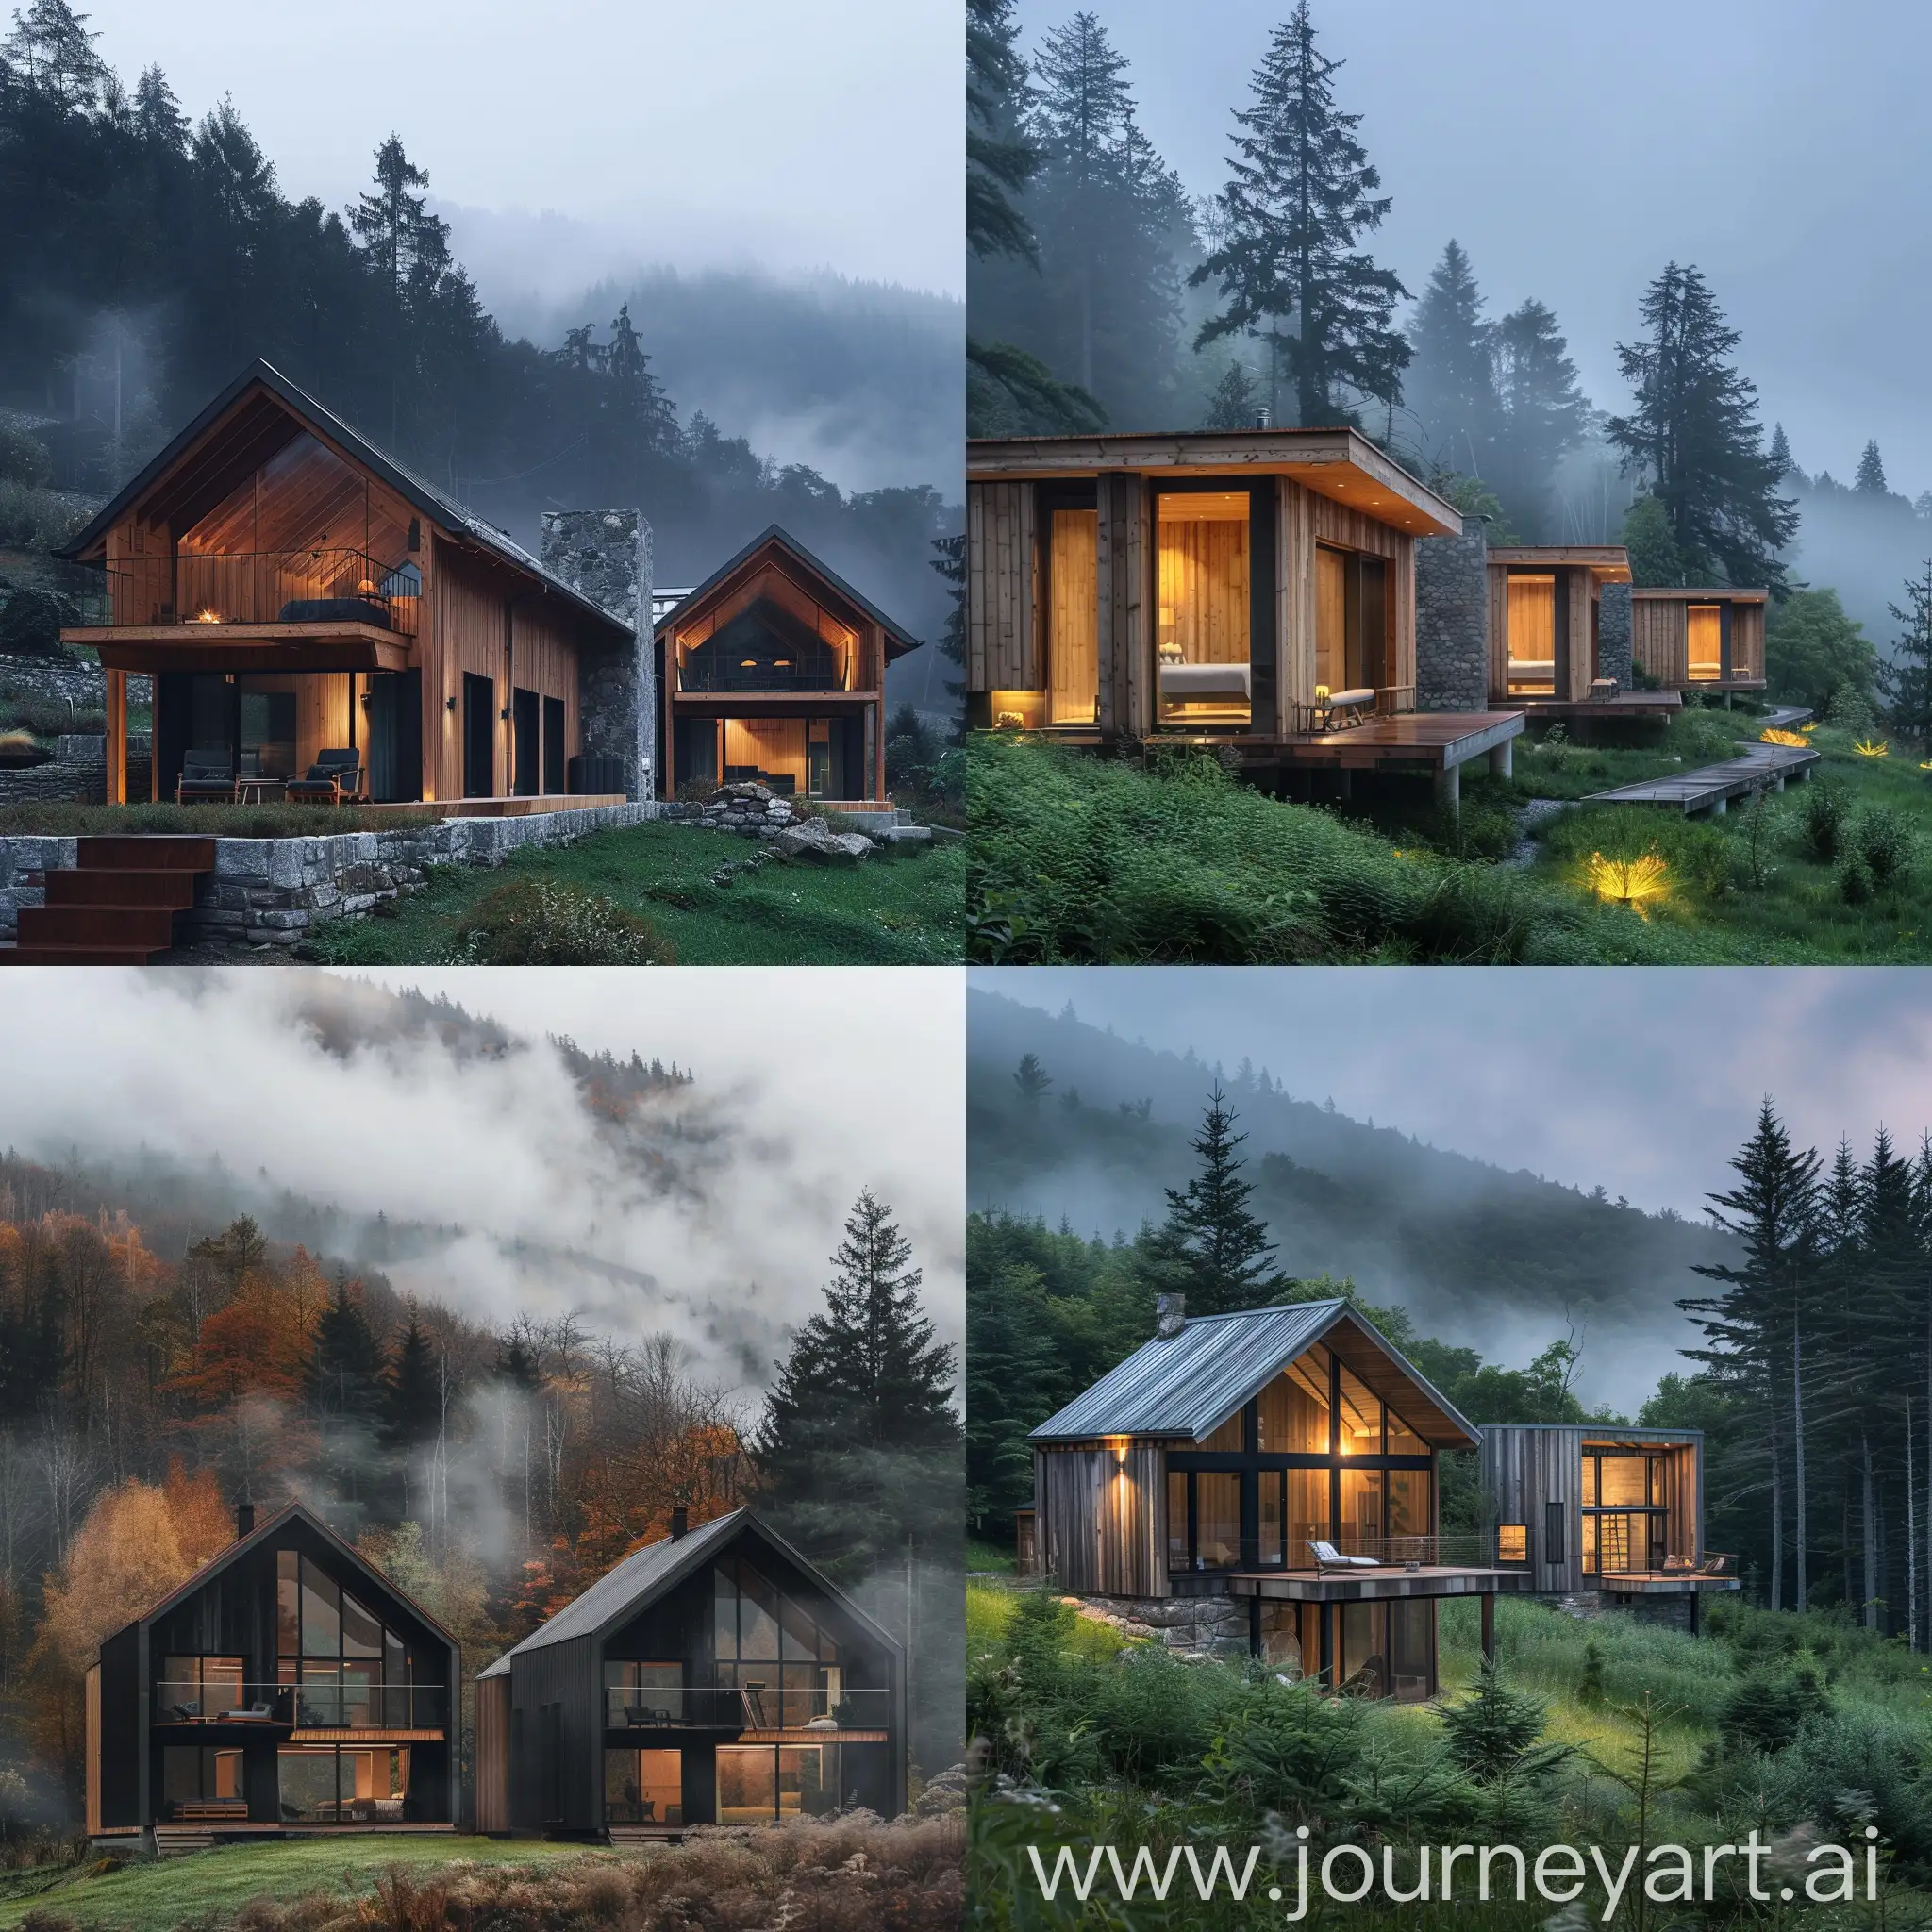 Misty-Mountain-Rustic-Cabins-Serene-Getaway-in-Natures-Embrace